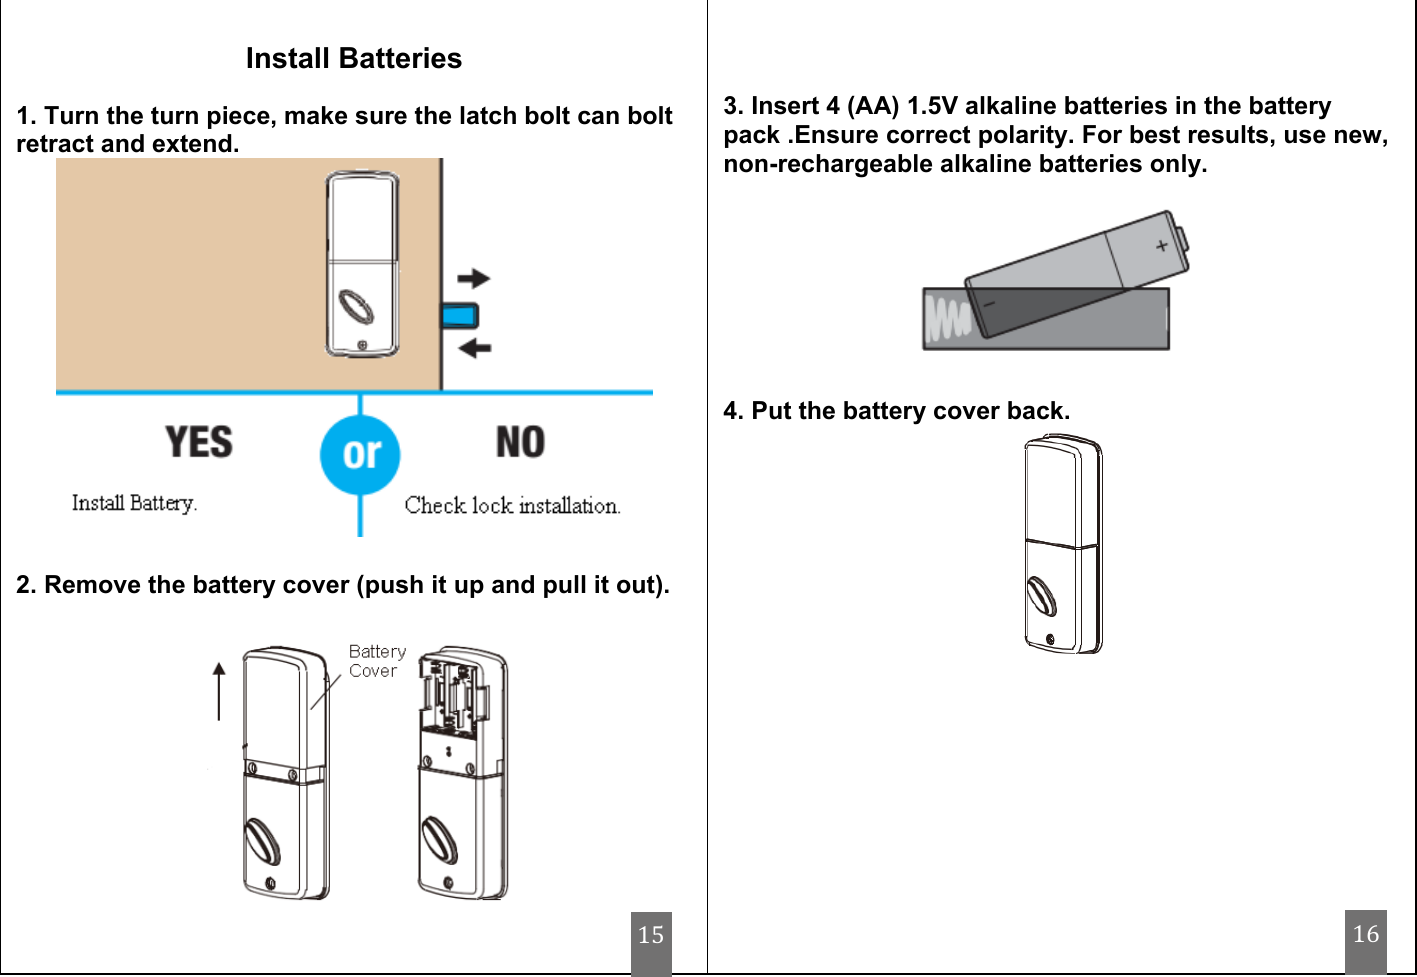                                     Install Batteries  1. Turn the turn piece, make sure the latch bolt can bolt retract and extend.   2. Remove the battery cover (push it up and pull it out).      3. Insert 4 (AA) 1.5V alkaline batteries in the battery pack .Ensure correct polarity. For best results, use new, non-rechargeable alkaline batteries only.              4. Put the battery cover back.  15 16 